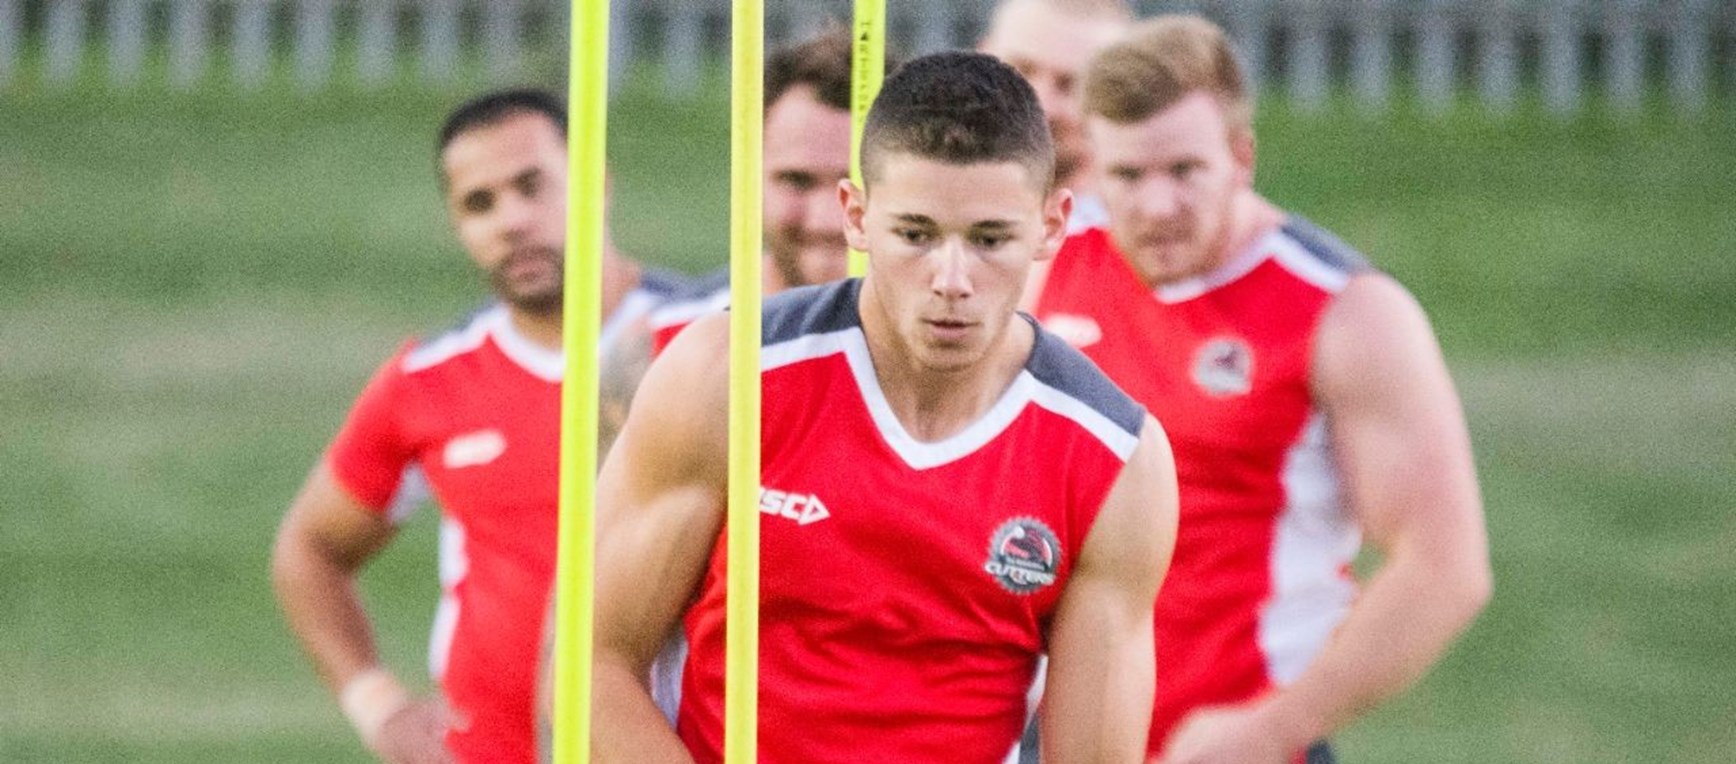 Gallery: Cutters Training Round 7